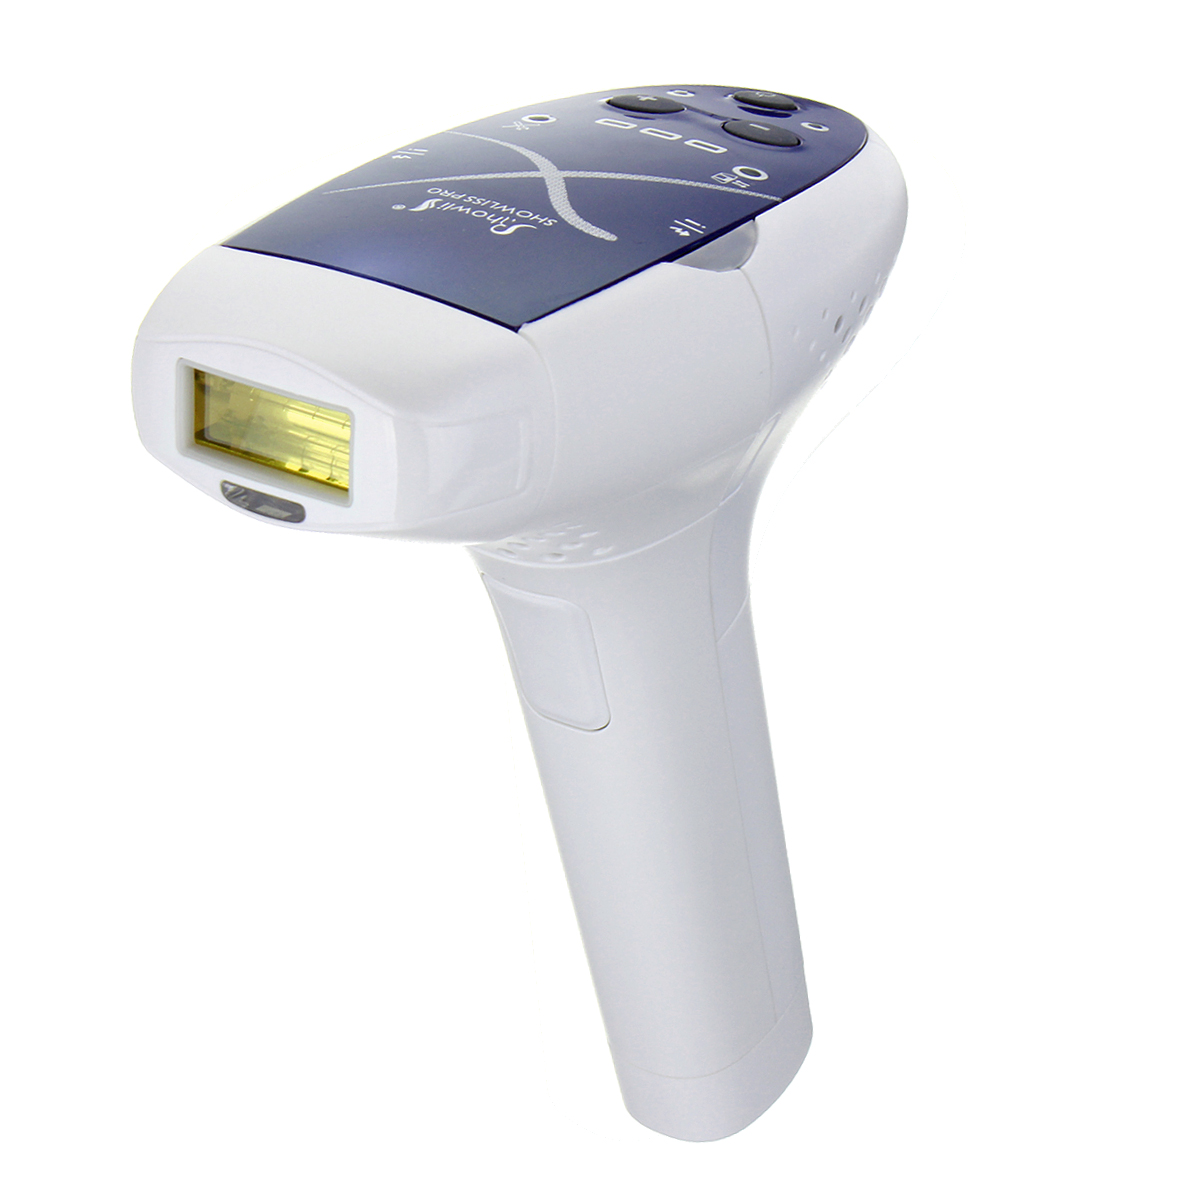 

300000 Pulses IPL Laser Electric Full Body Permanent Hair Removal Epilator Machine Face or Body Home Use